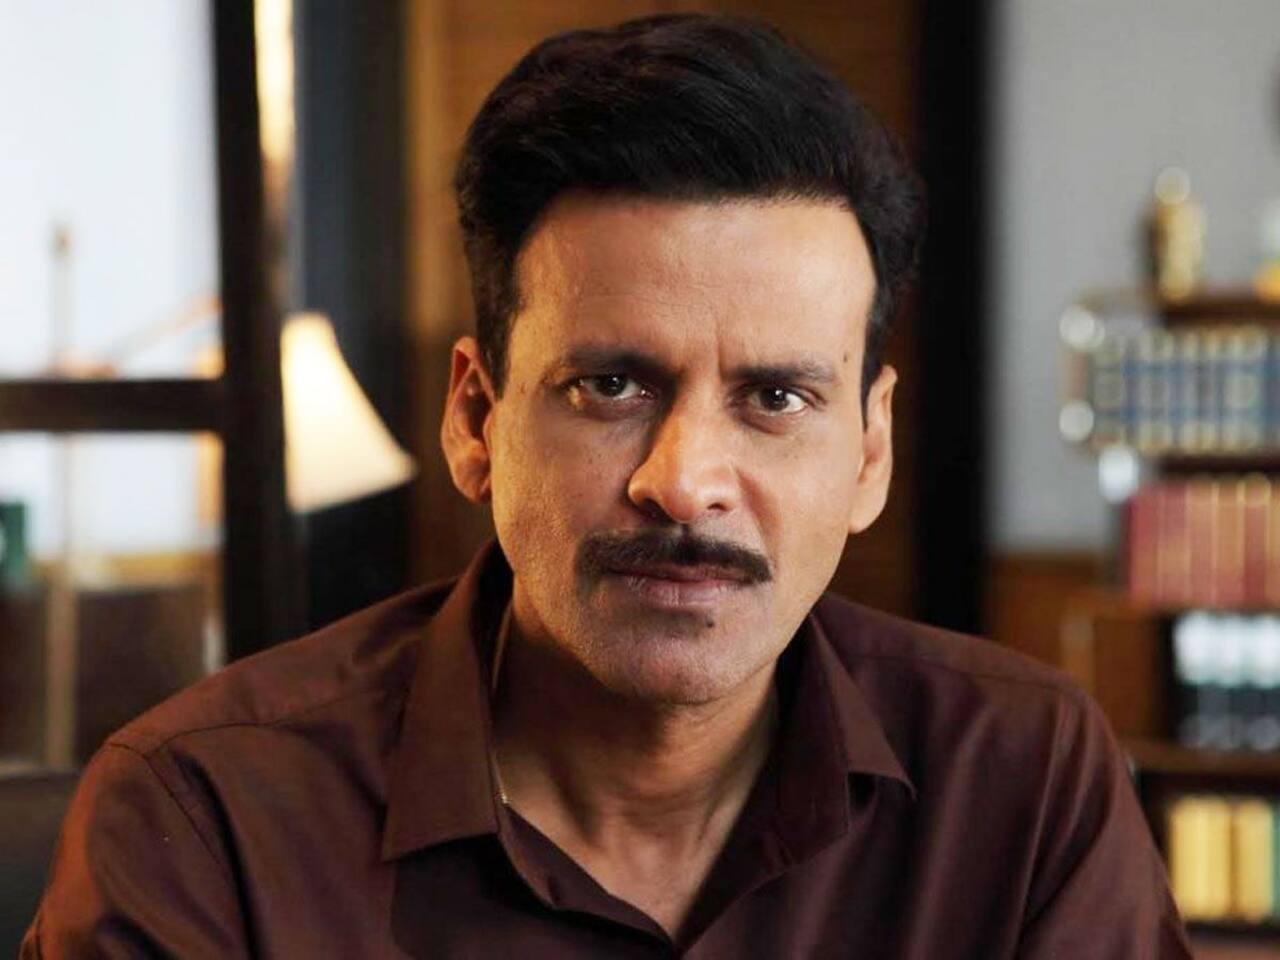 The Family Man 3 shoot and release: Manoj Bajpayee hints that fans have a long wait ahead before they see the Amazon Prime Video crime series 